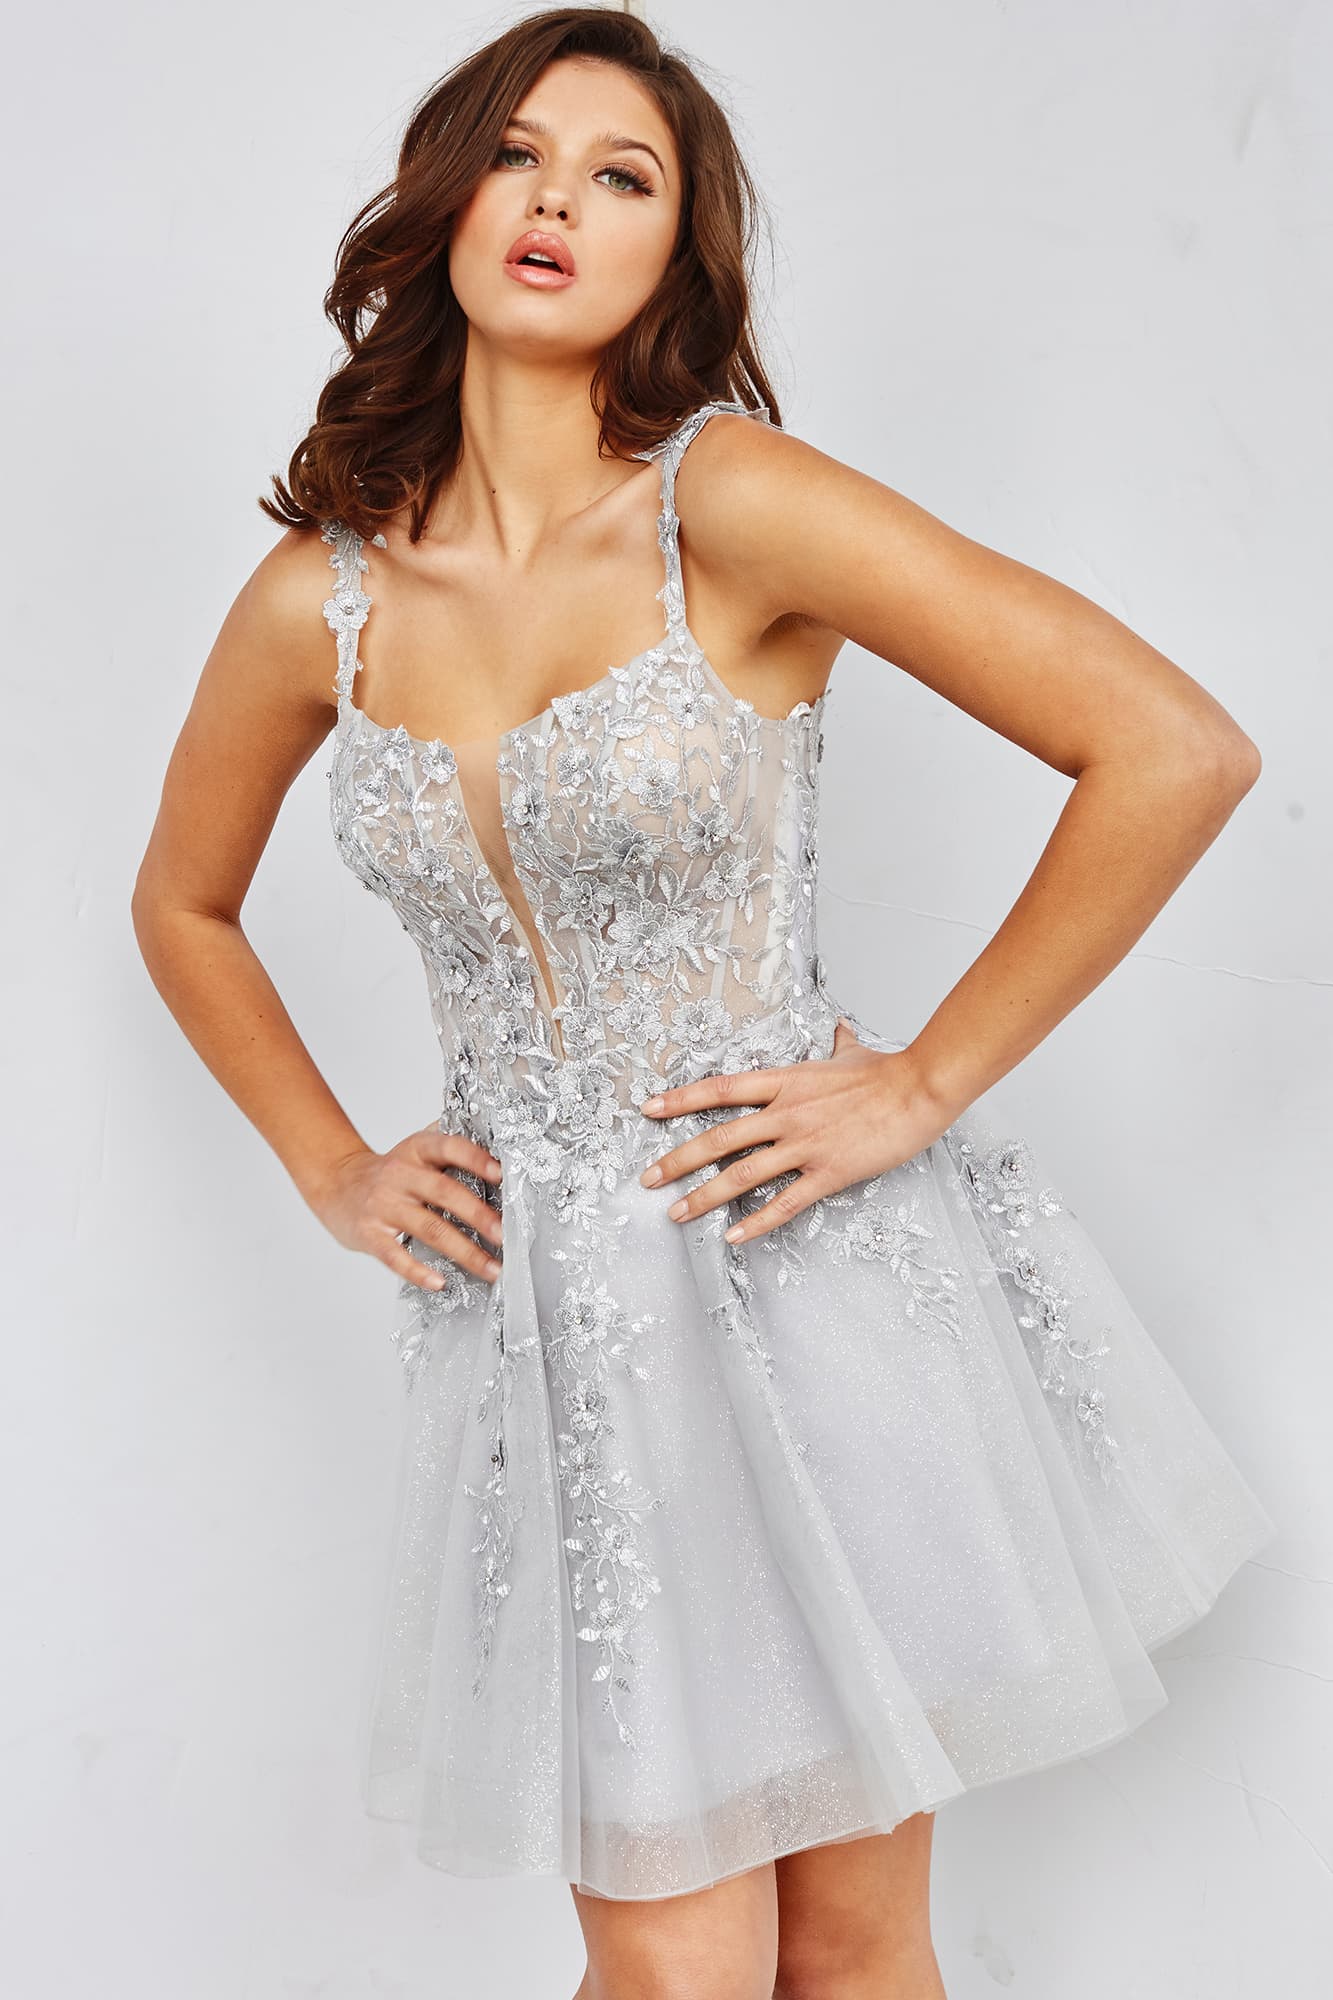 Jovani JVN22520  This JVN by Jovani homecoming dress features a sheer lace corset bodice, scoop neckline with an illusion plunging V panel, spaghetti straps and a scoop back. Beaded floral appliques richly embellish this glitter tulle A-line dress, finished with a gorgeously flared tulle skirt.